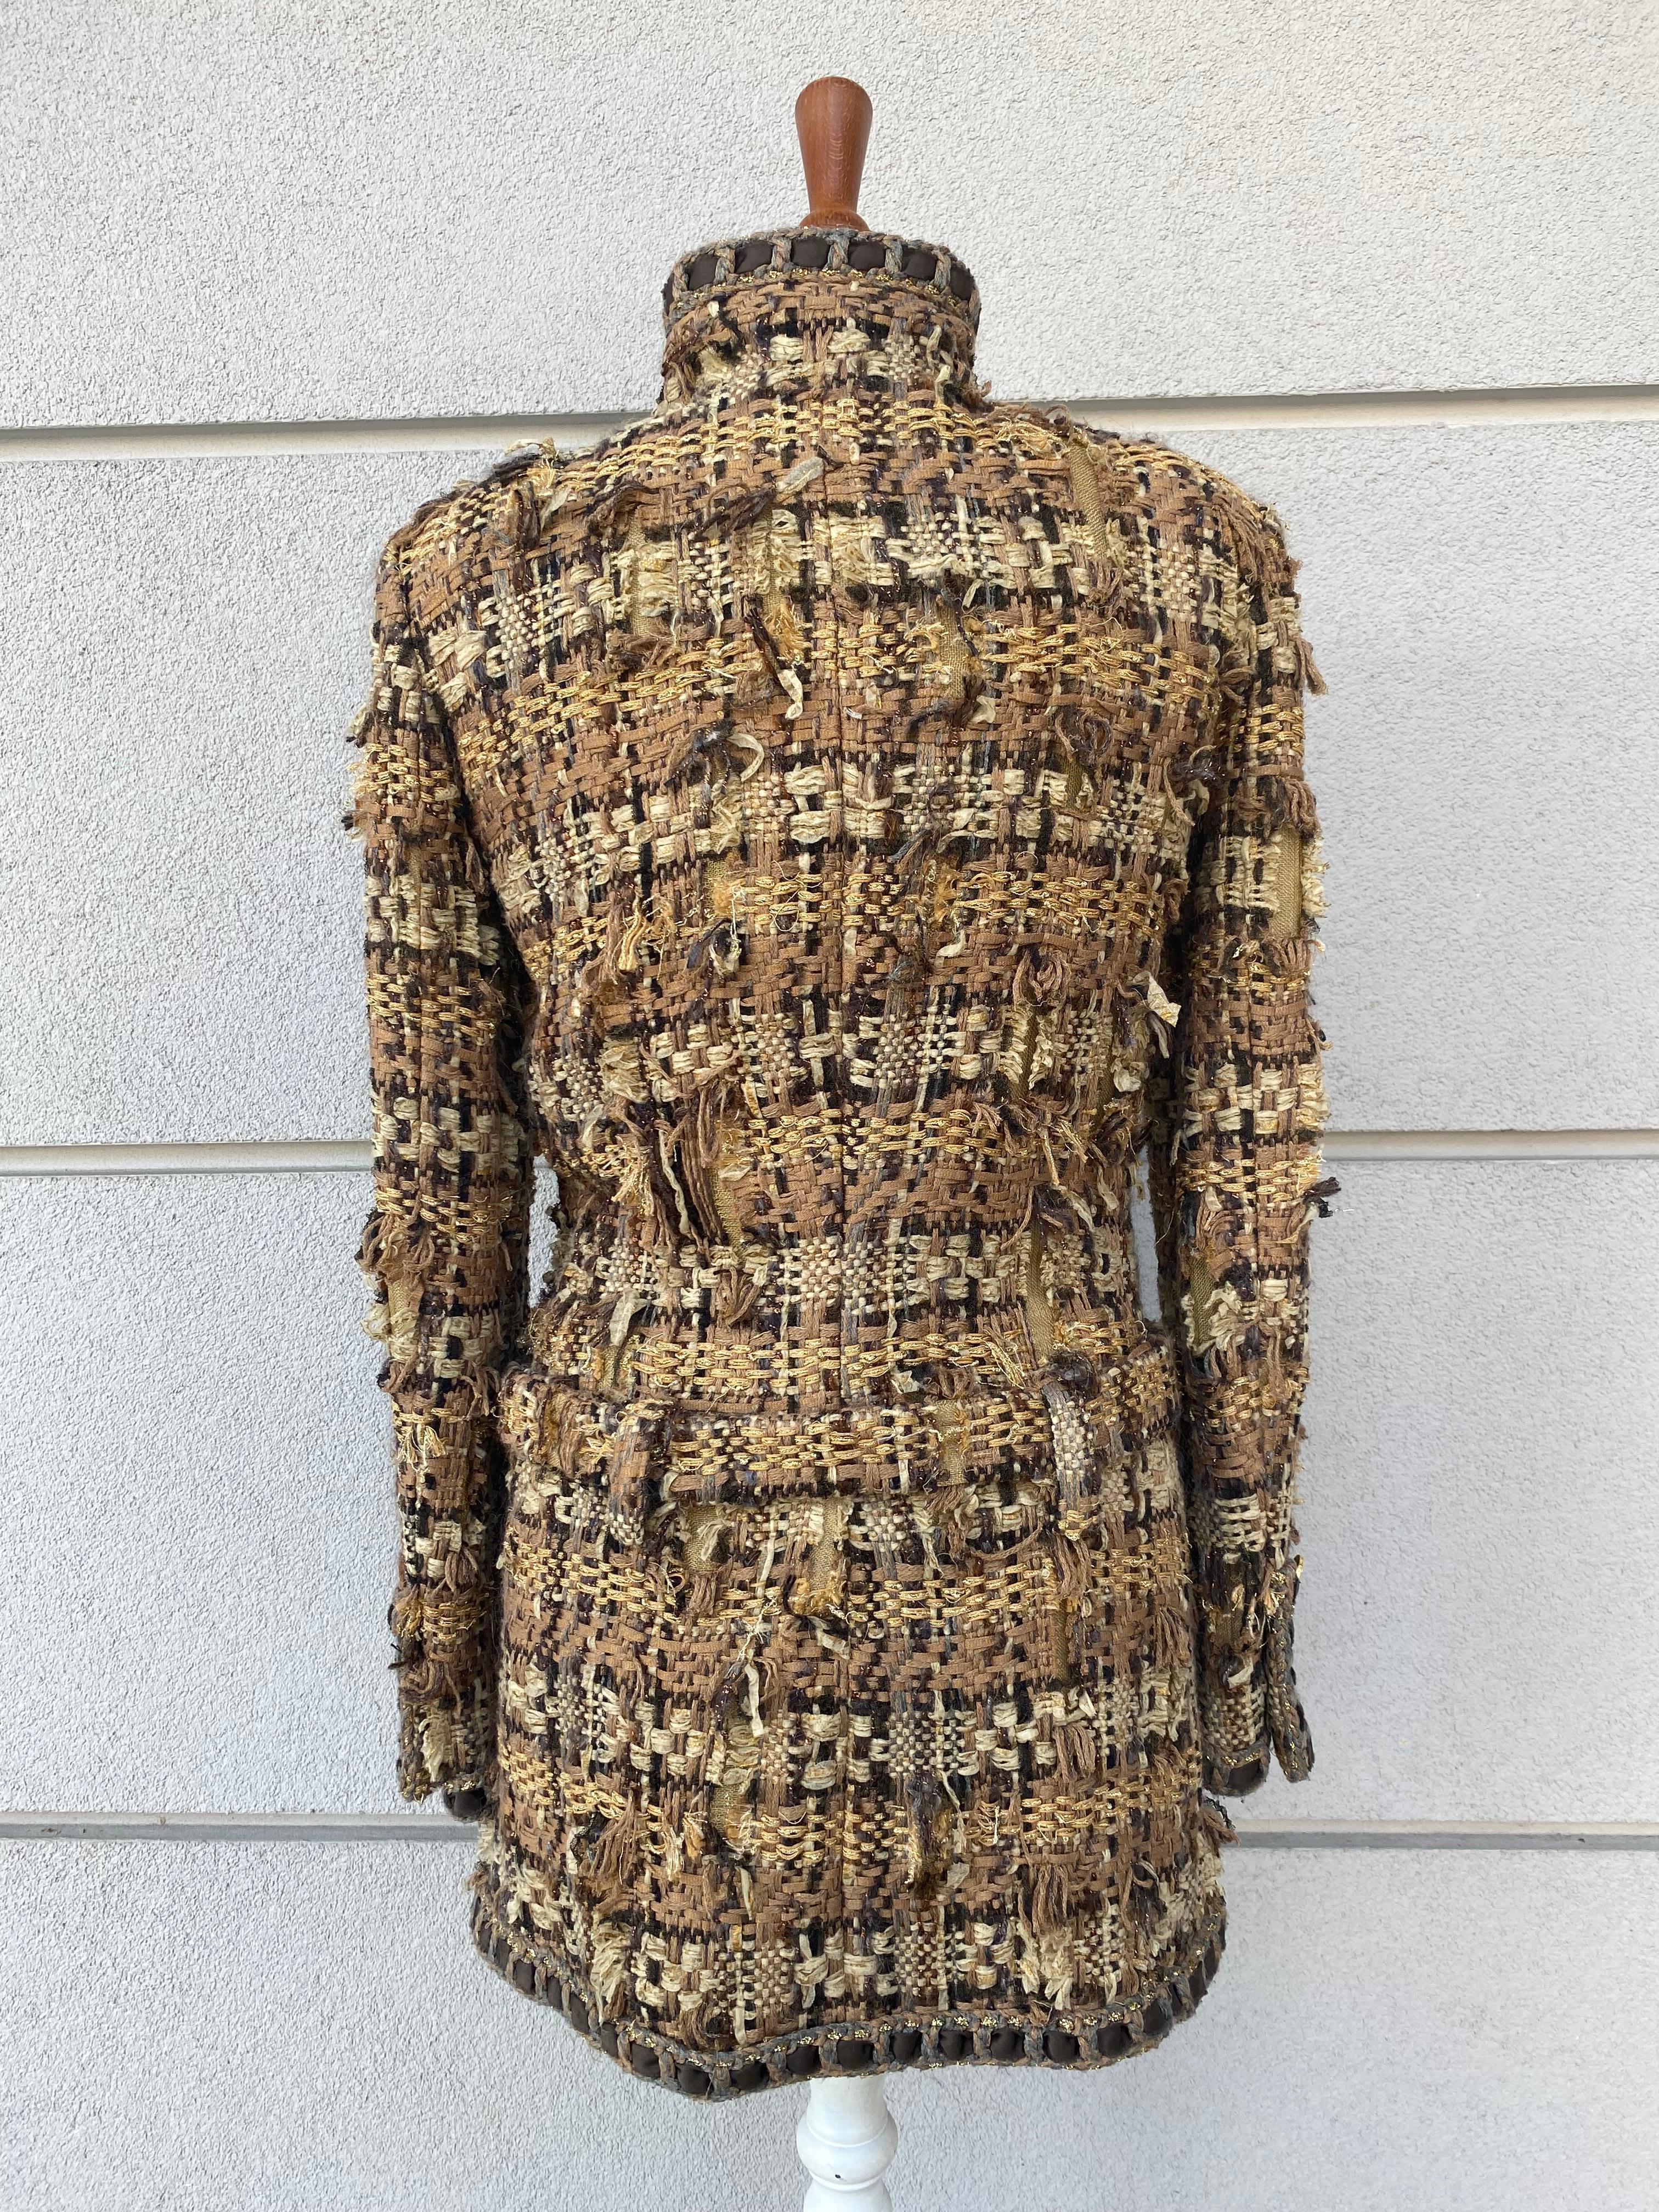 Brown Chanel tweed Lesage coat from the Chanel pre fall 2016 fashion show.